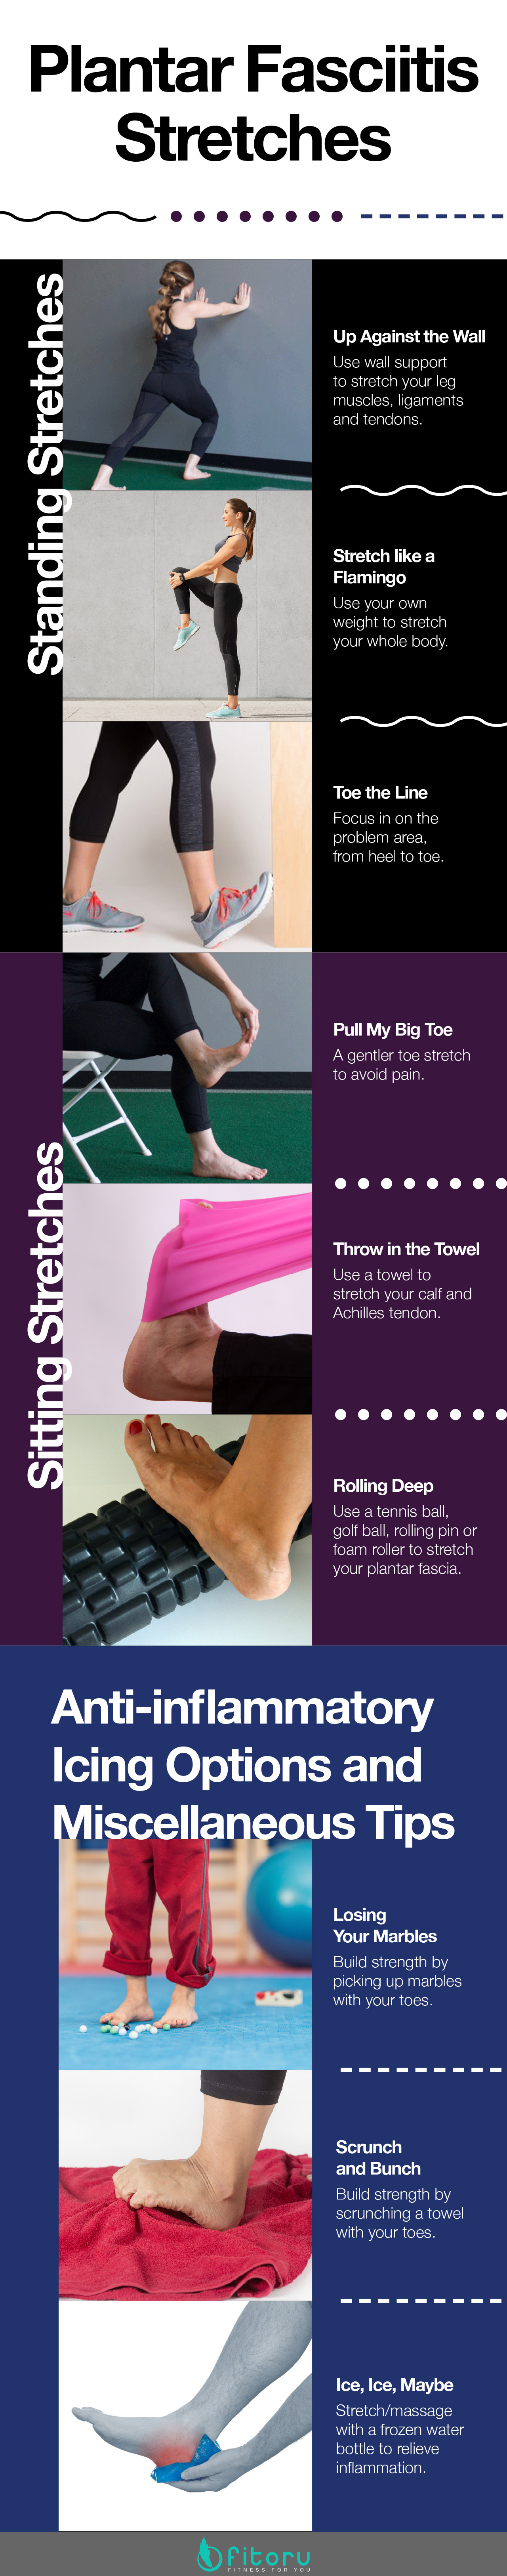 Plantar fasciitis stretches, exercises, and tips.